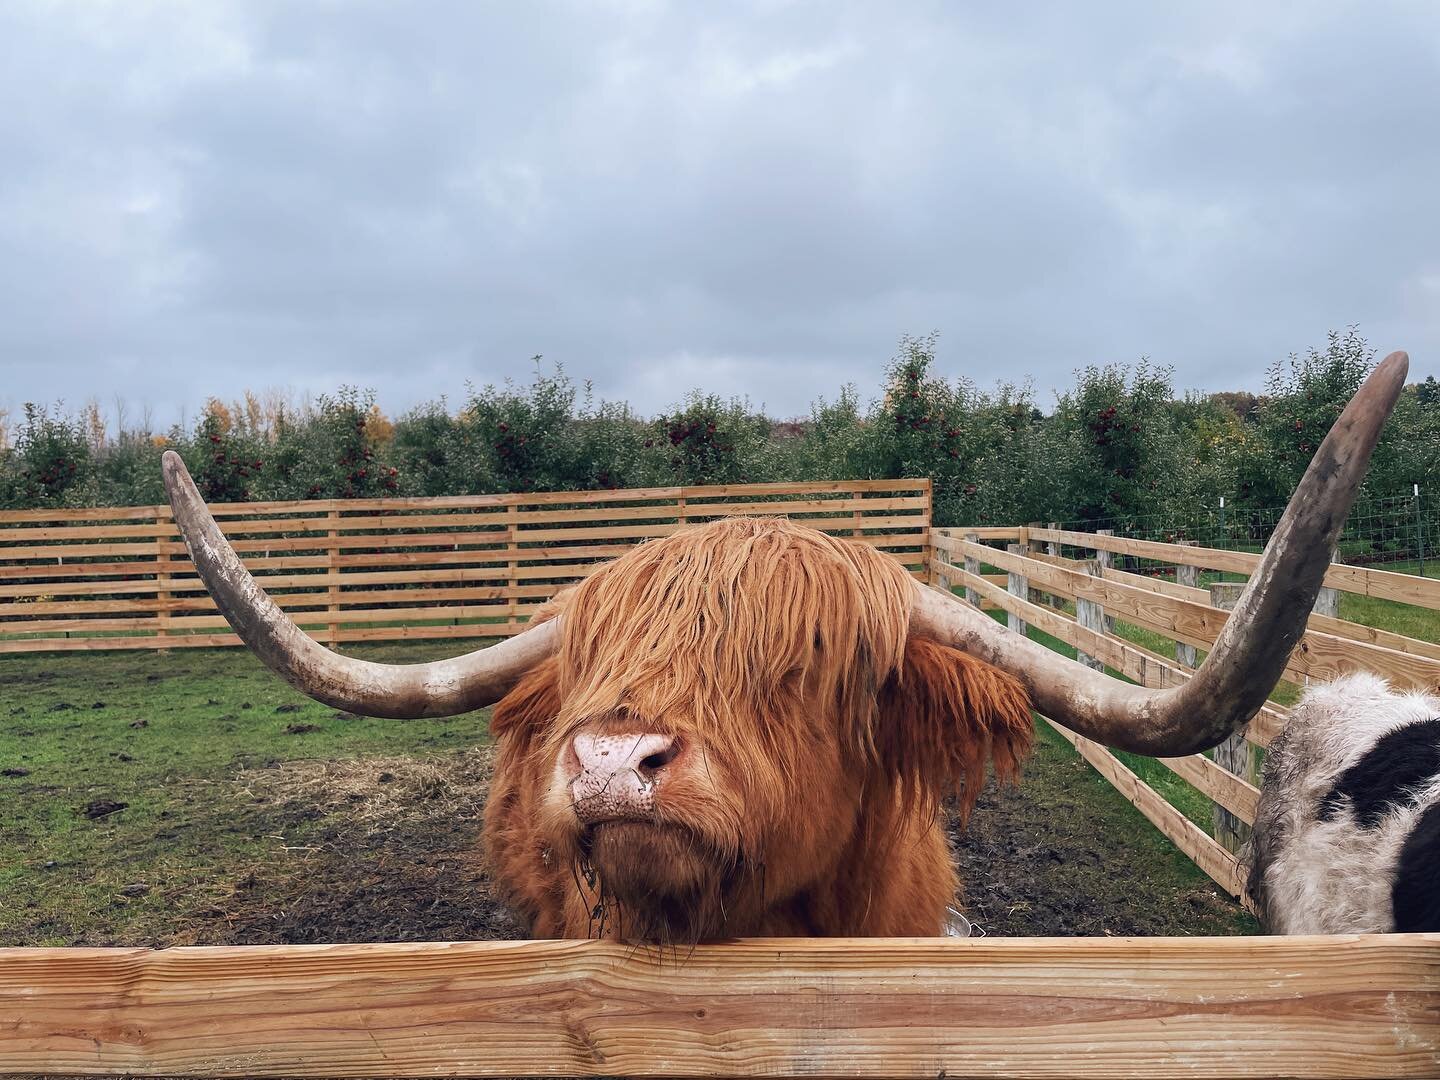 Extremely obsessed with Moe, the Scottish Highland Cow